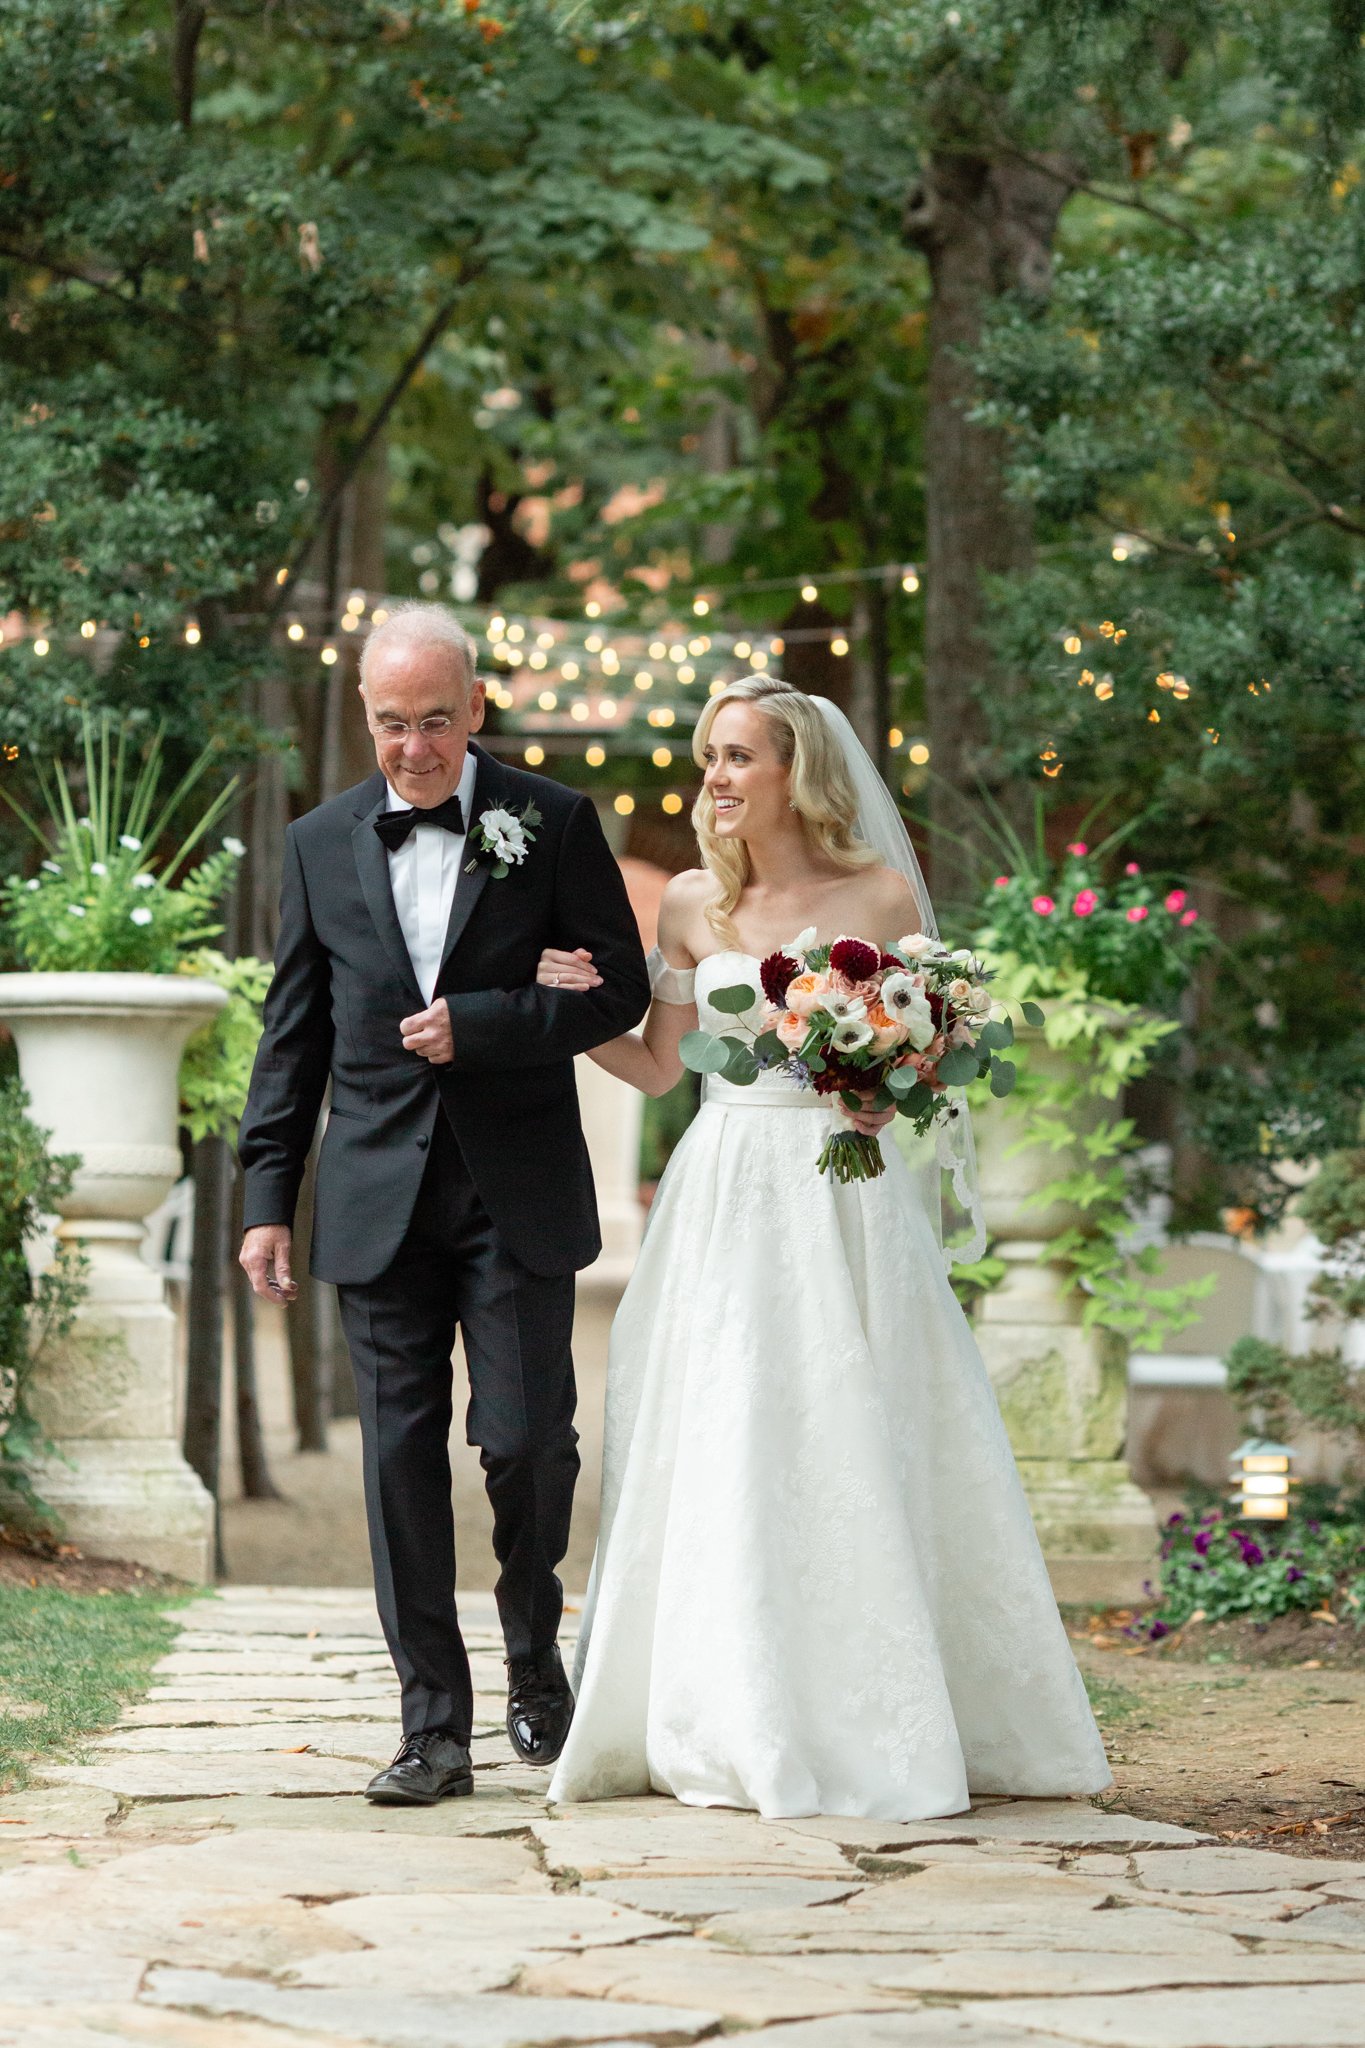 Jessica and Andrew’s Romantic and Dreamy Autumn Wedding at Mer